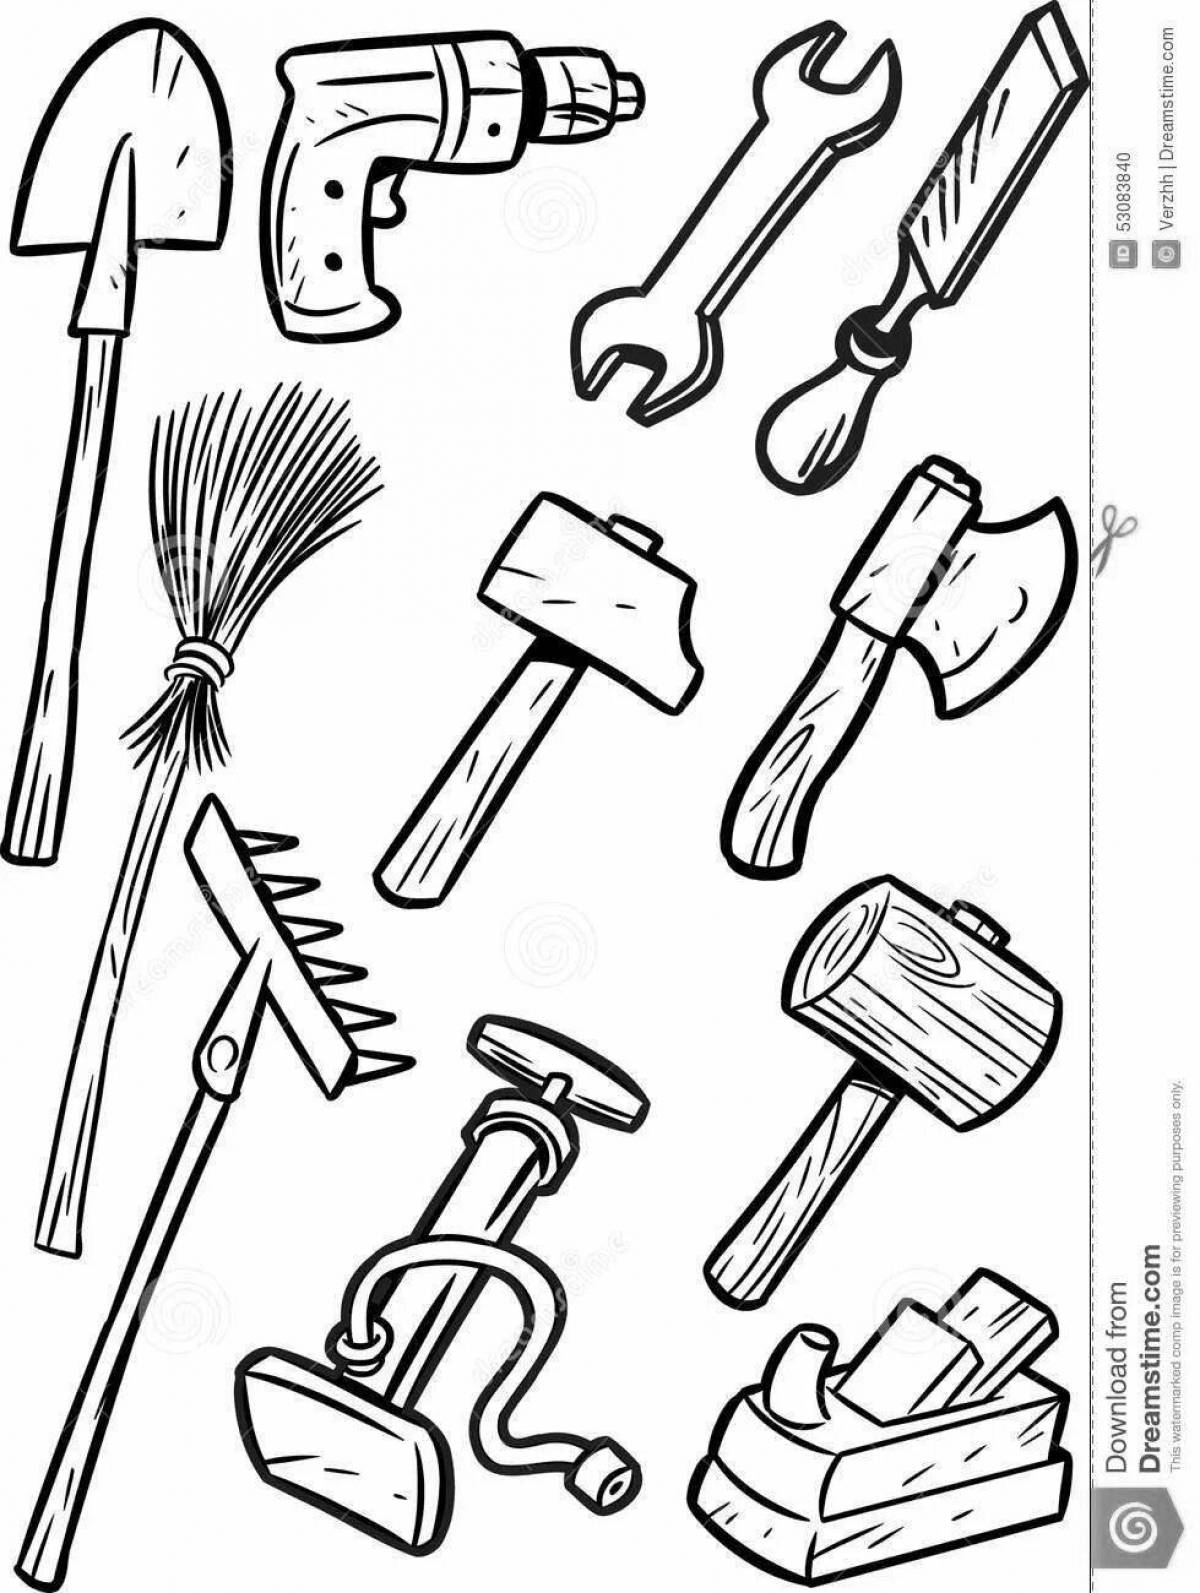 Coloring page with tools for 4-5 year olds